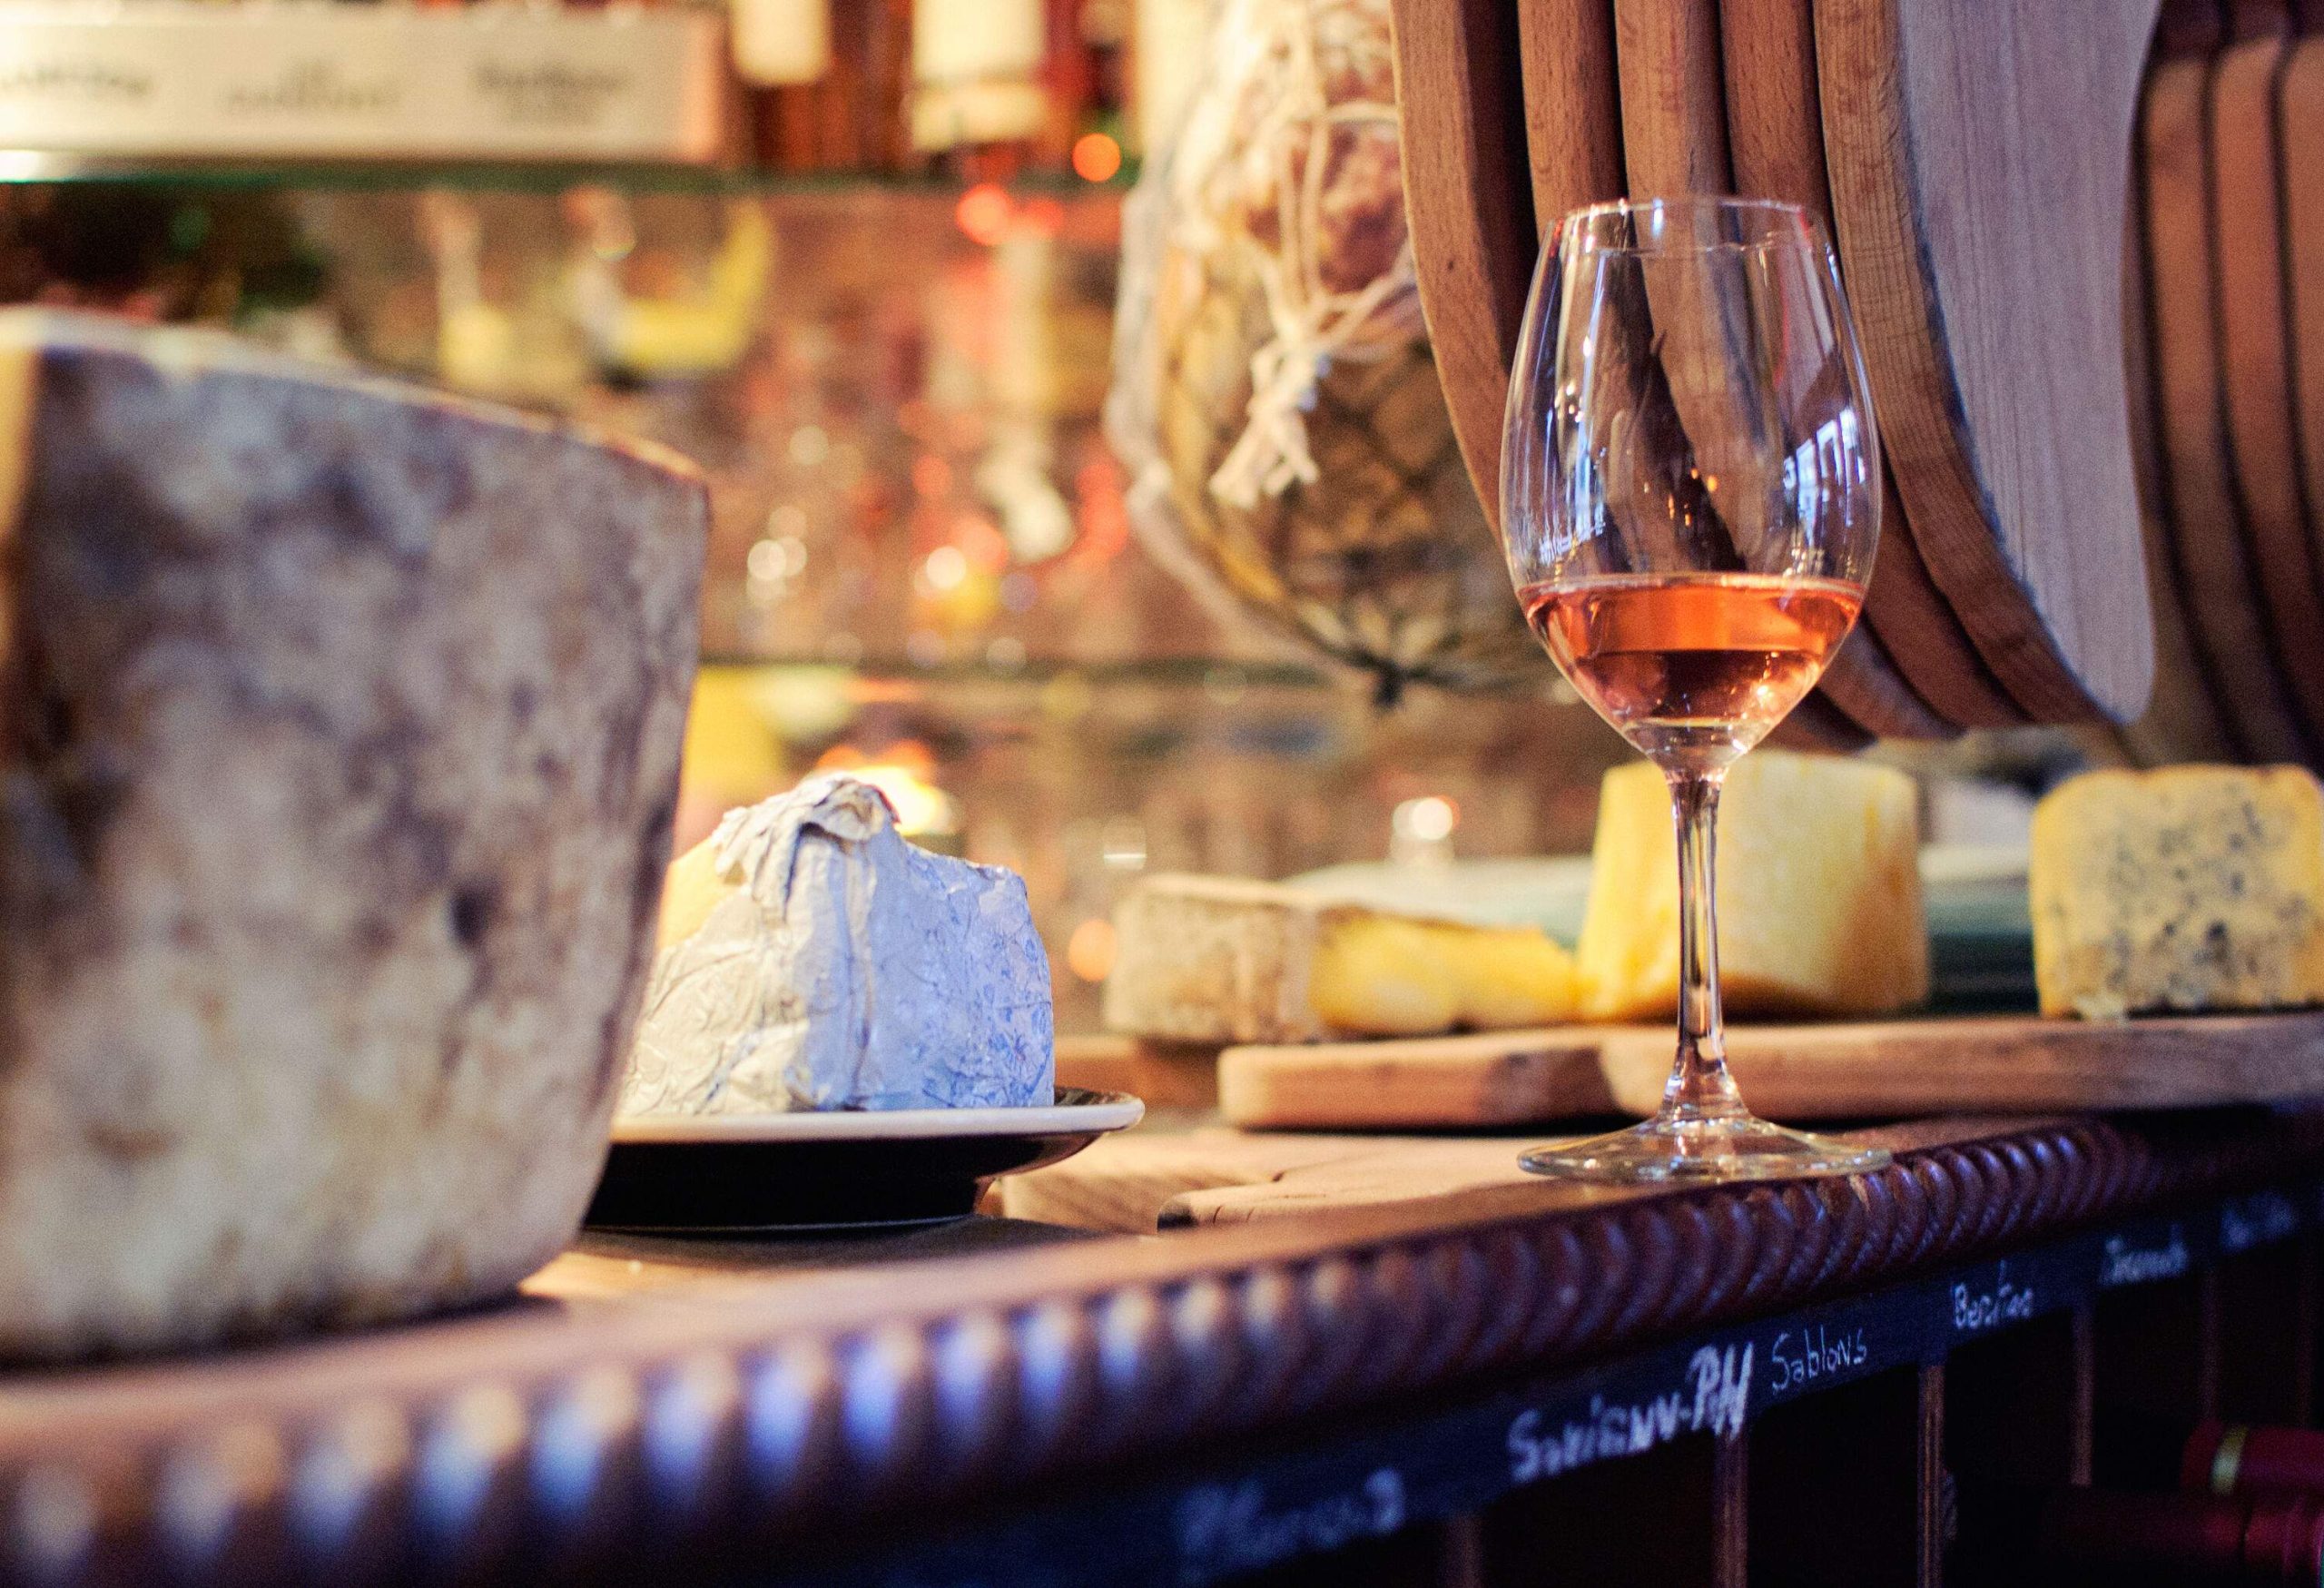 A glass of wine alongside cheese is placed on a counter bar.